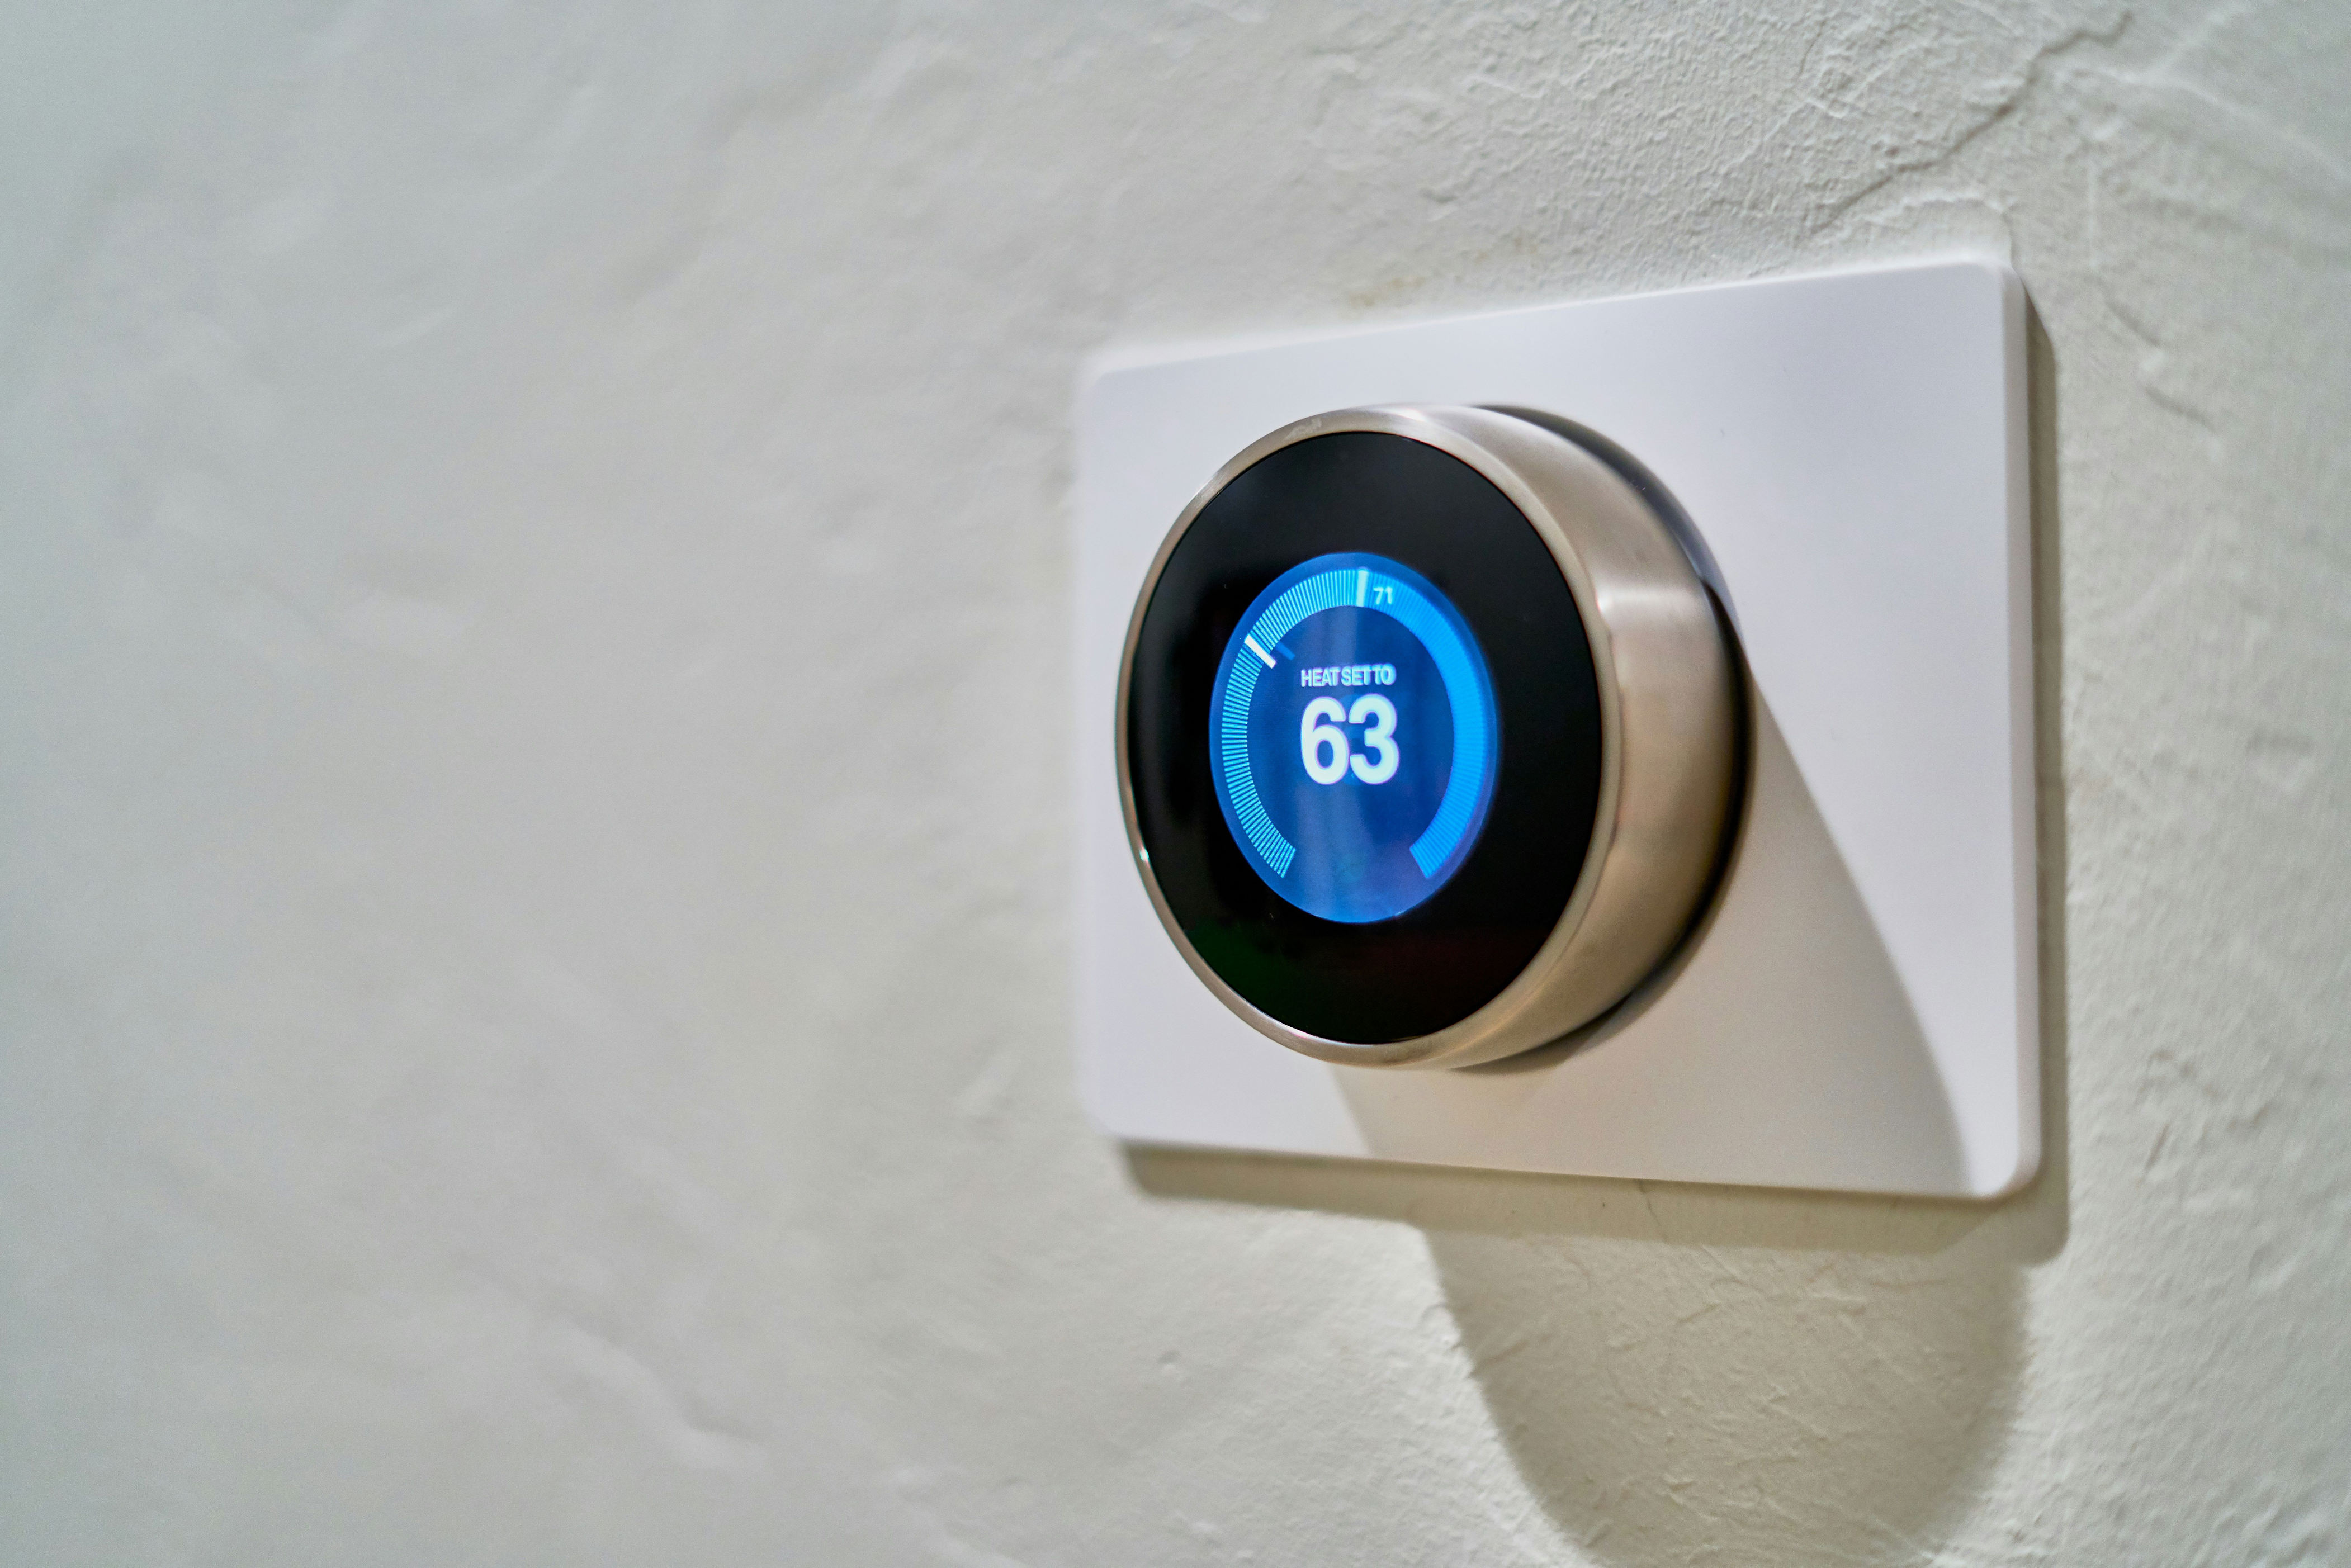 <p>Upgrading to a programmable or smart thermostat is an affordable way to improve your home's energy efficiency and appeal to tech-savvy buyers. These devices allow you to customize your heating and cooling schedules, ensuring that your home is comfortable when you need it and energy-efficient when you're away.</p><p>Smart thermostats take it a step further by learning your preferences and automatically adjusting the temperature based on your habits. Some models even allow you to control your thermostat remotely using your smartphone. These features not only make your life more convenient but also help you save on energy bills, which can be attractive to potential buyers.</p>